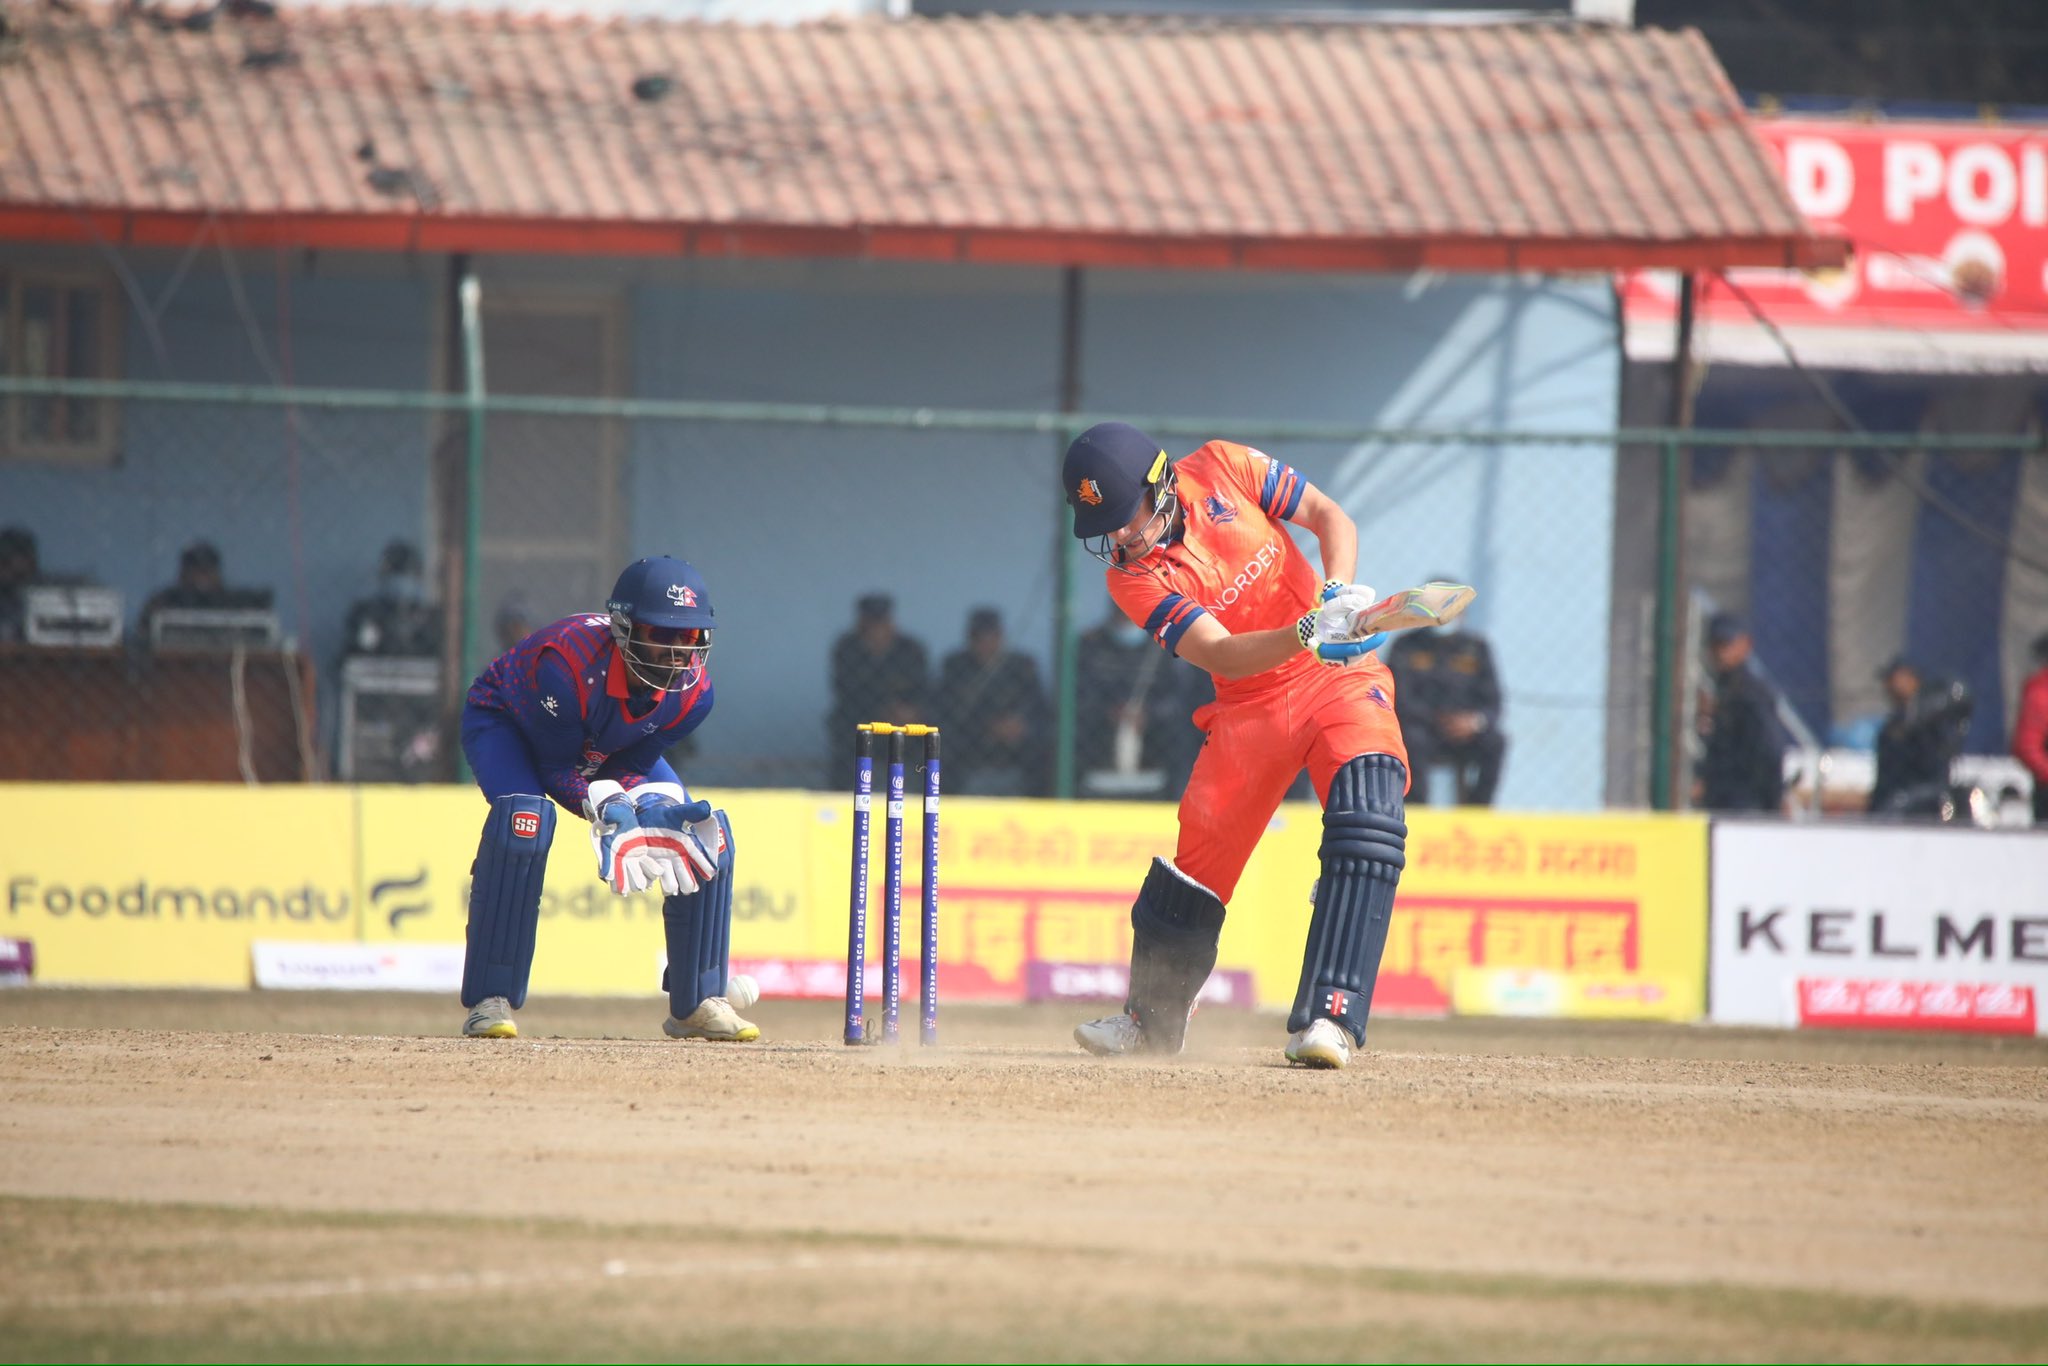 Nepal eyes victory chase as Netherlands sets 138-run target